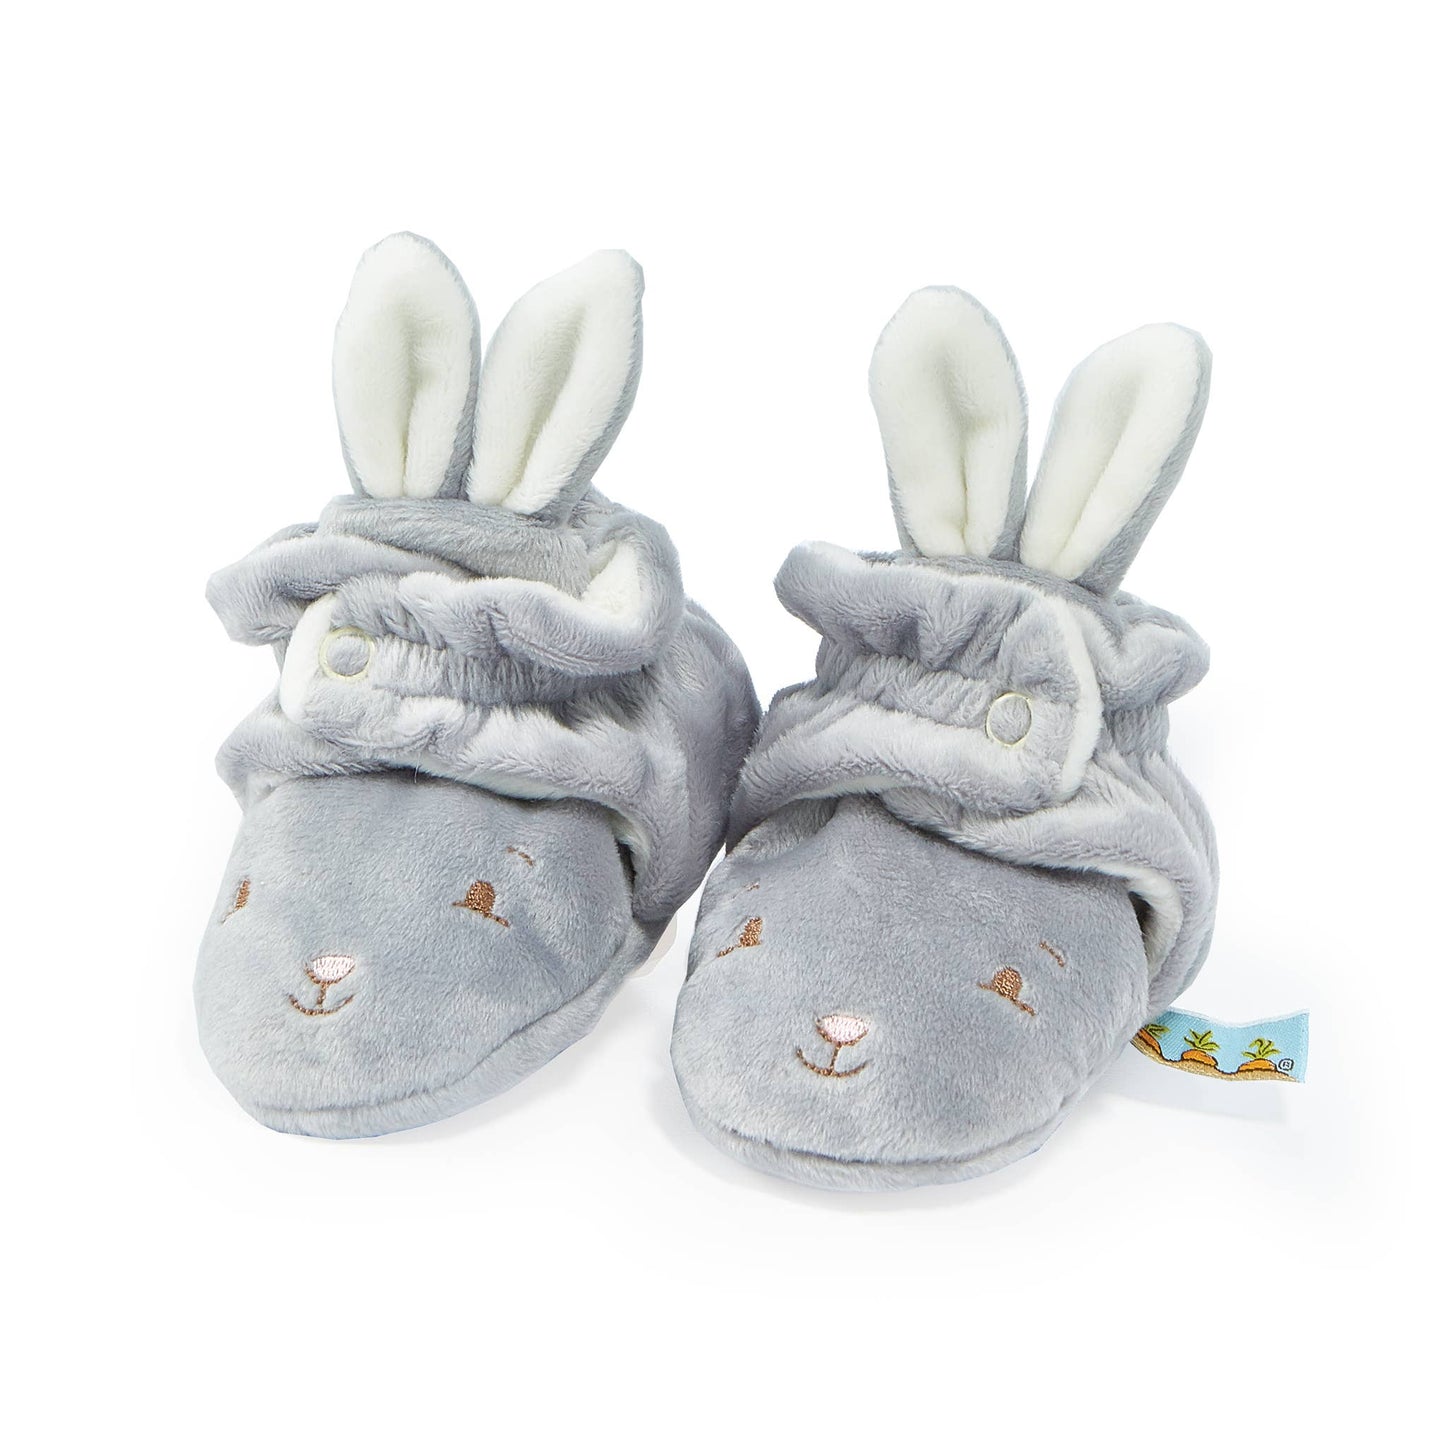 Baby bunny slippers by Bunnies by the Bay